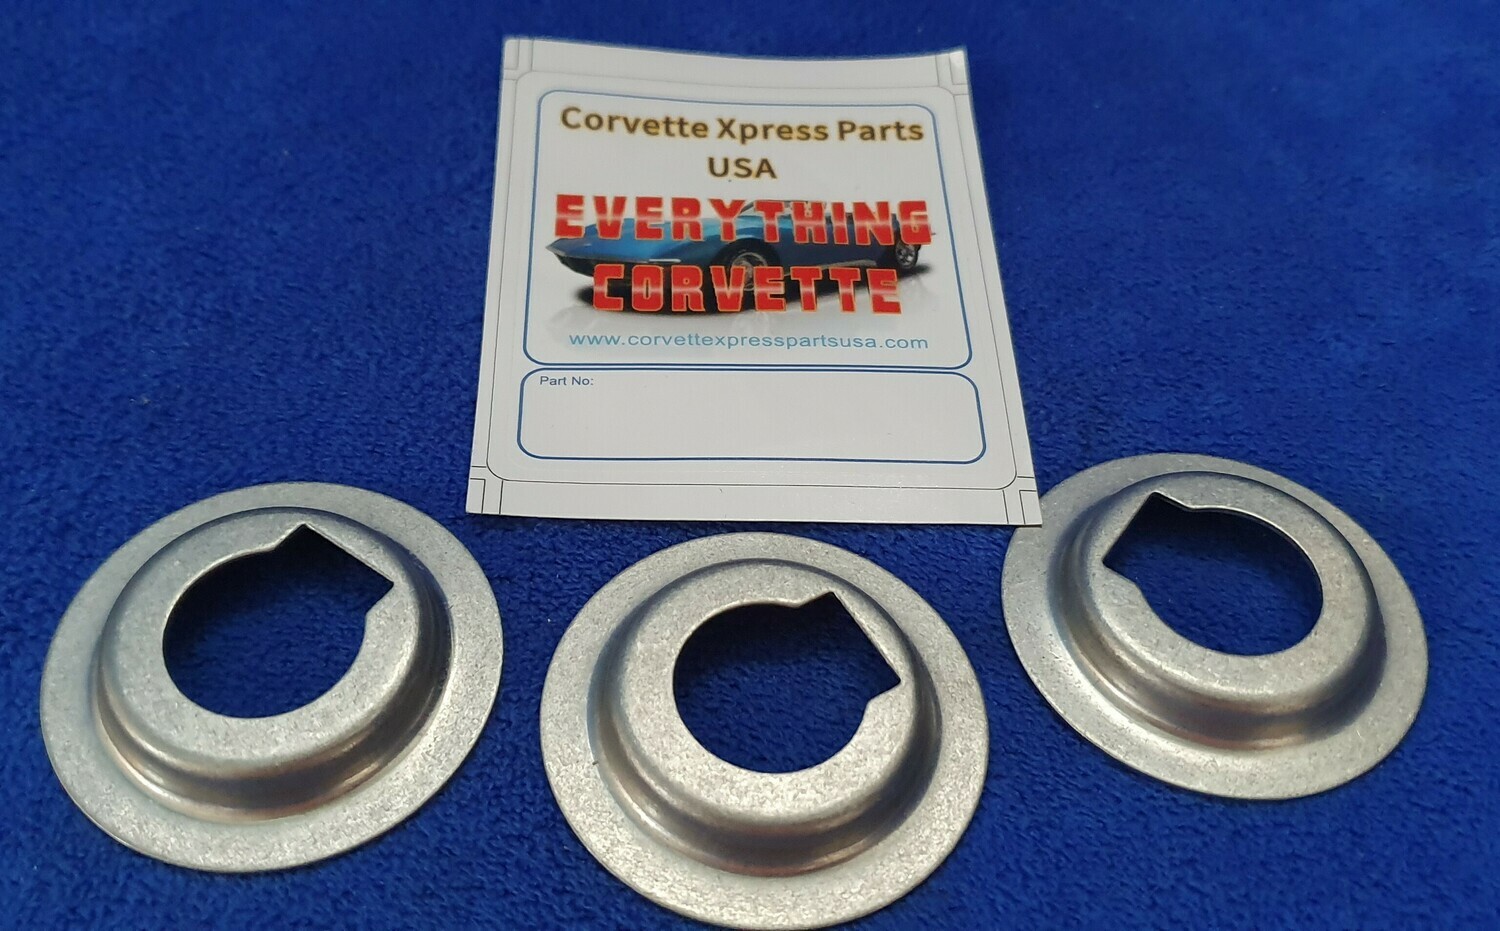 LATCH ESCUTCHEON SET-REAR COMPARTMENT-STAINLESS STEEL-3 PIECES-USA-68-77 (#EC520)